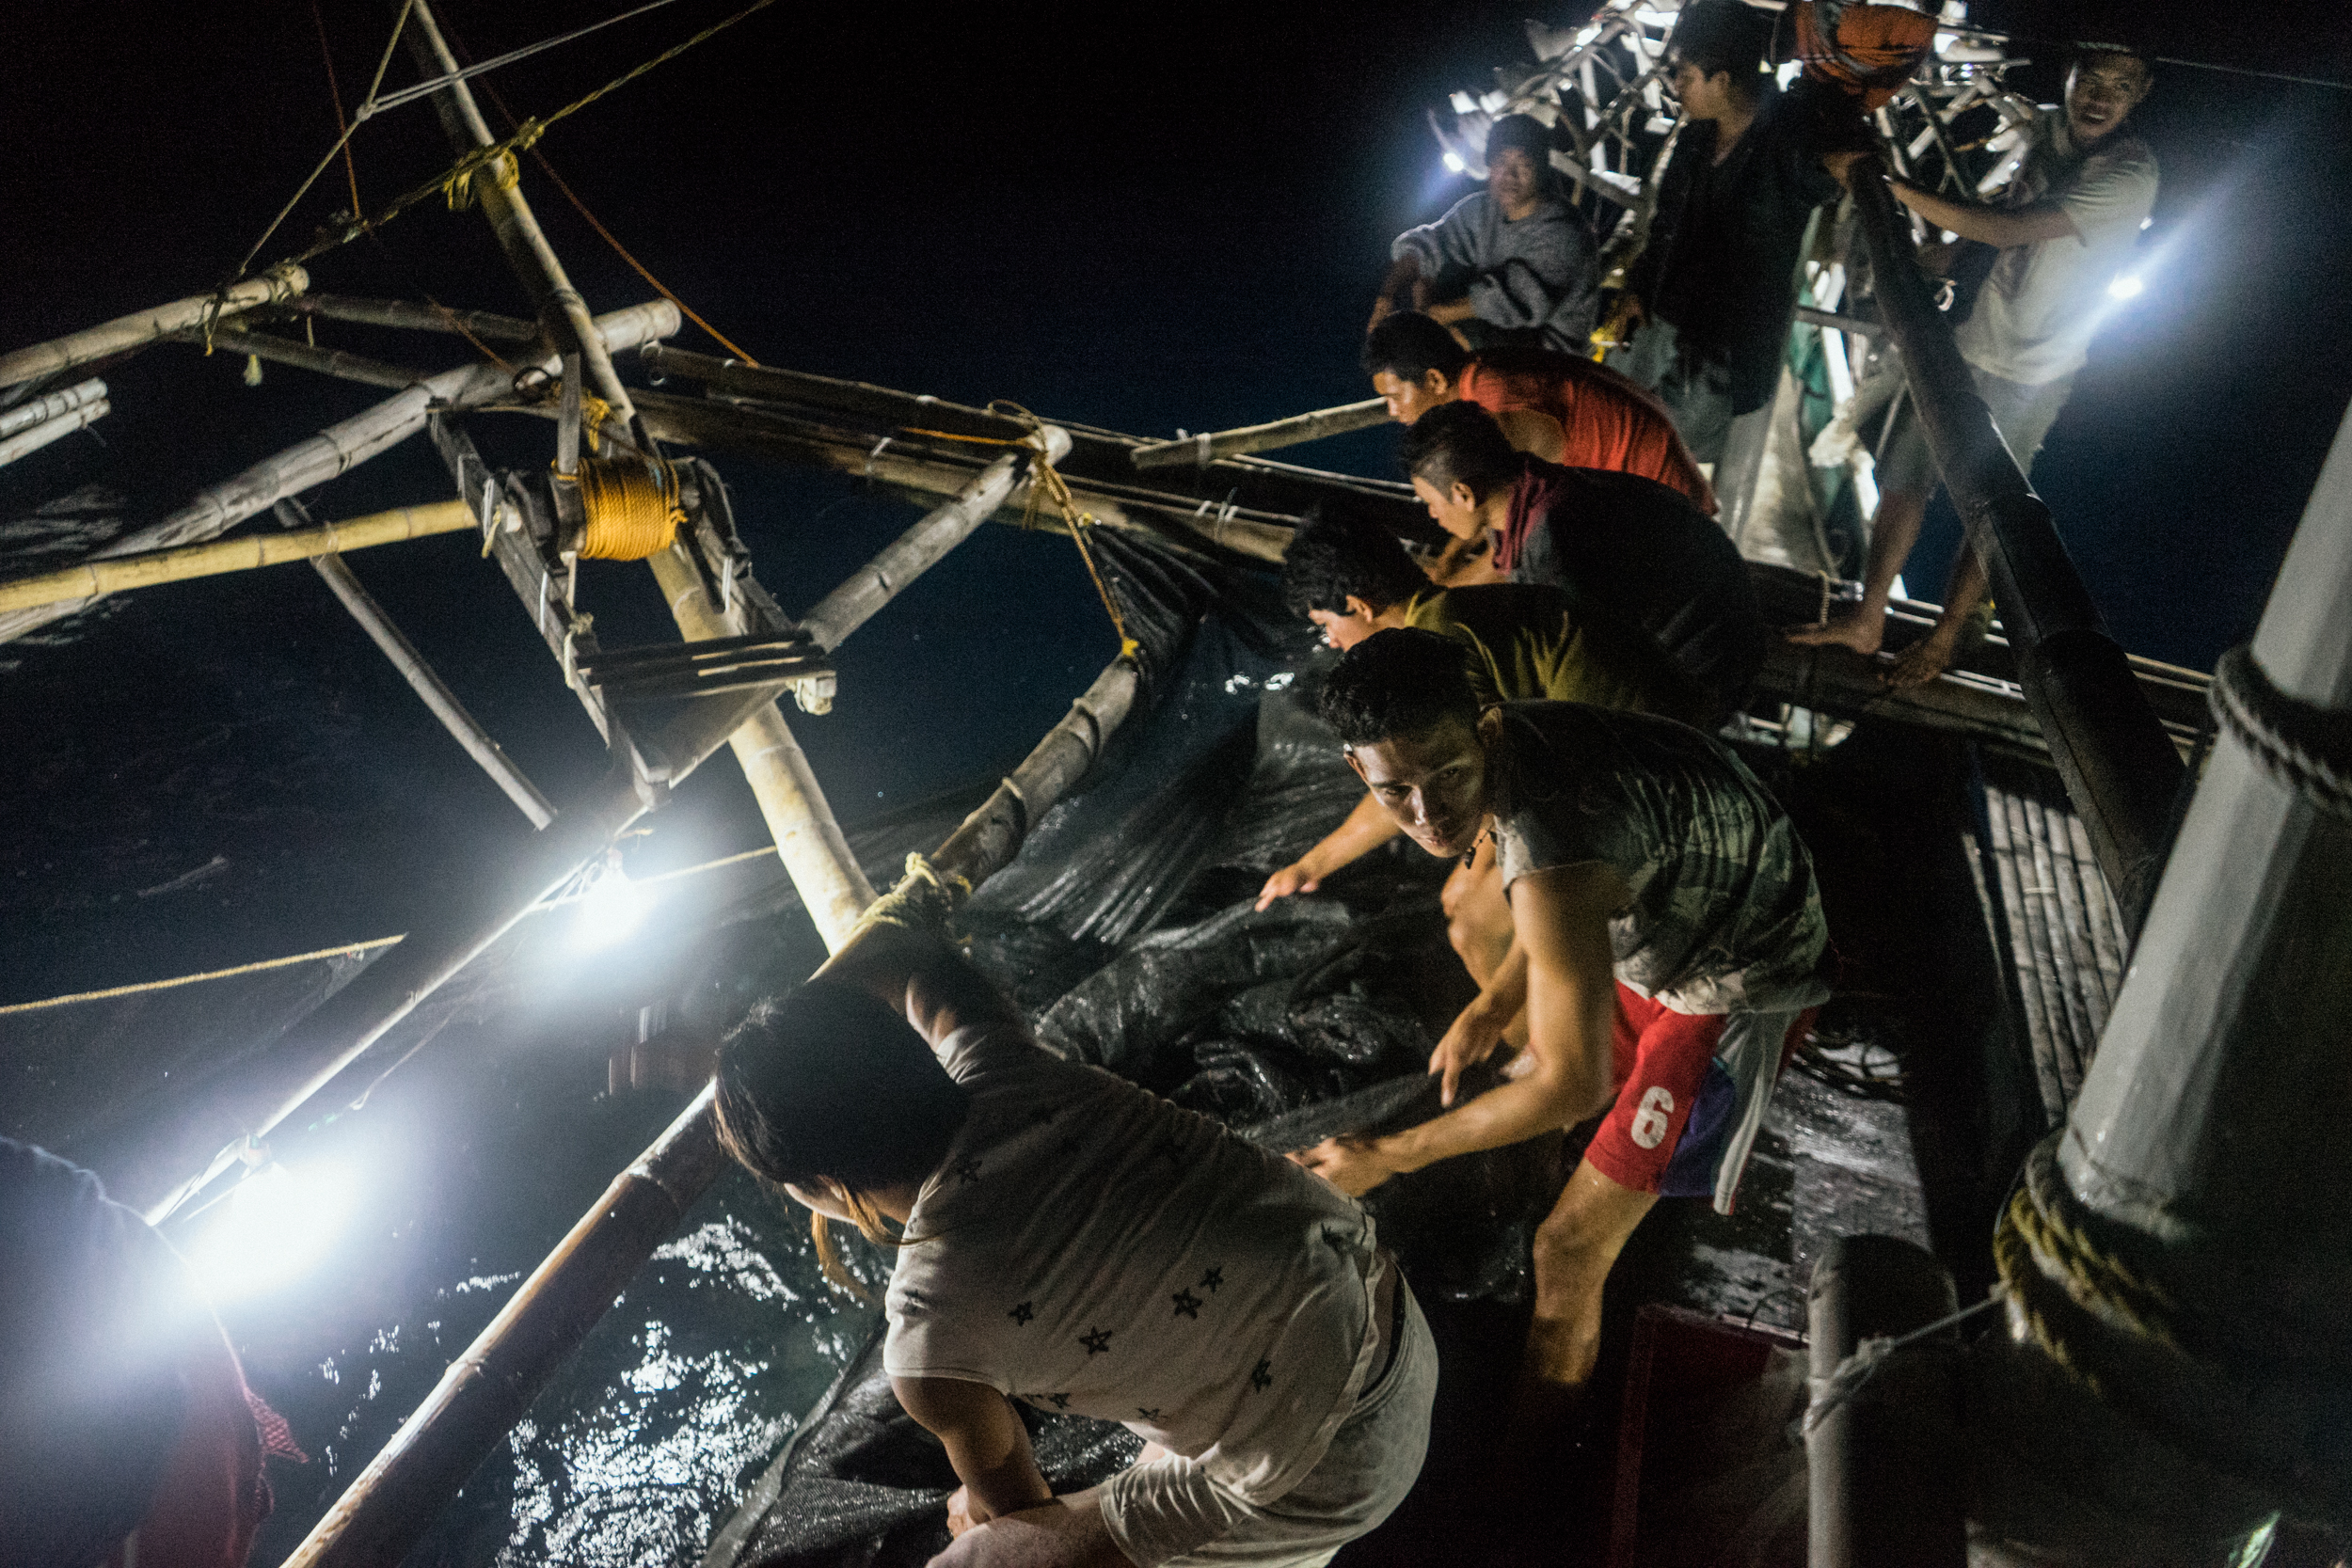  Kalibo, Philippines - September 21, 2015: Fishermen work in a local fishing boat. Members of the crew, who make approximately 35 USD per month, have expressed their desire to work on a larger fishing vessel for the promise of a higher income despite